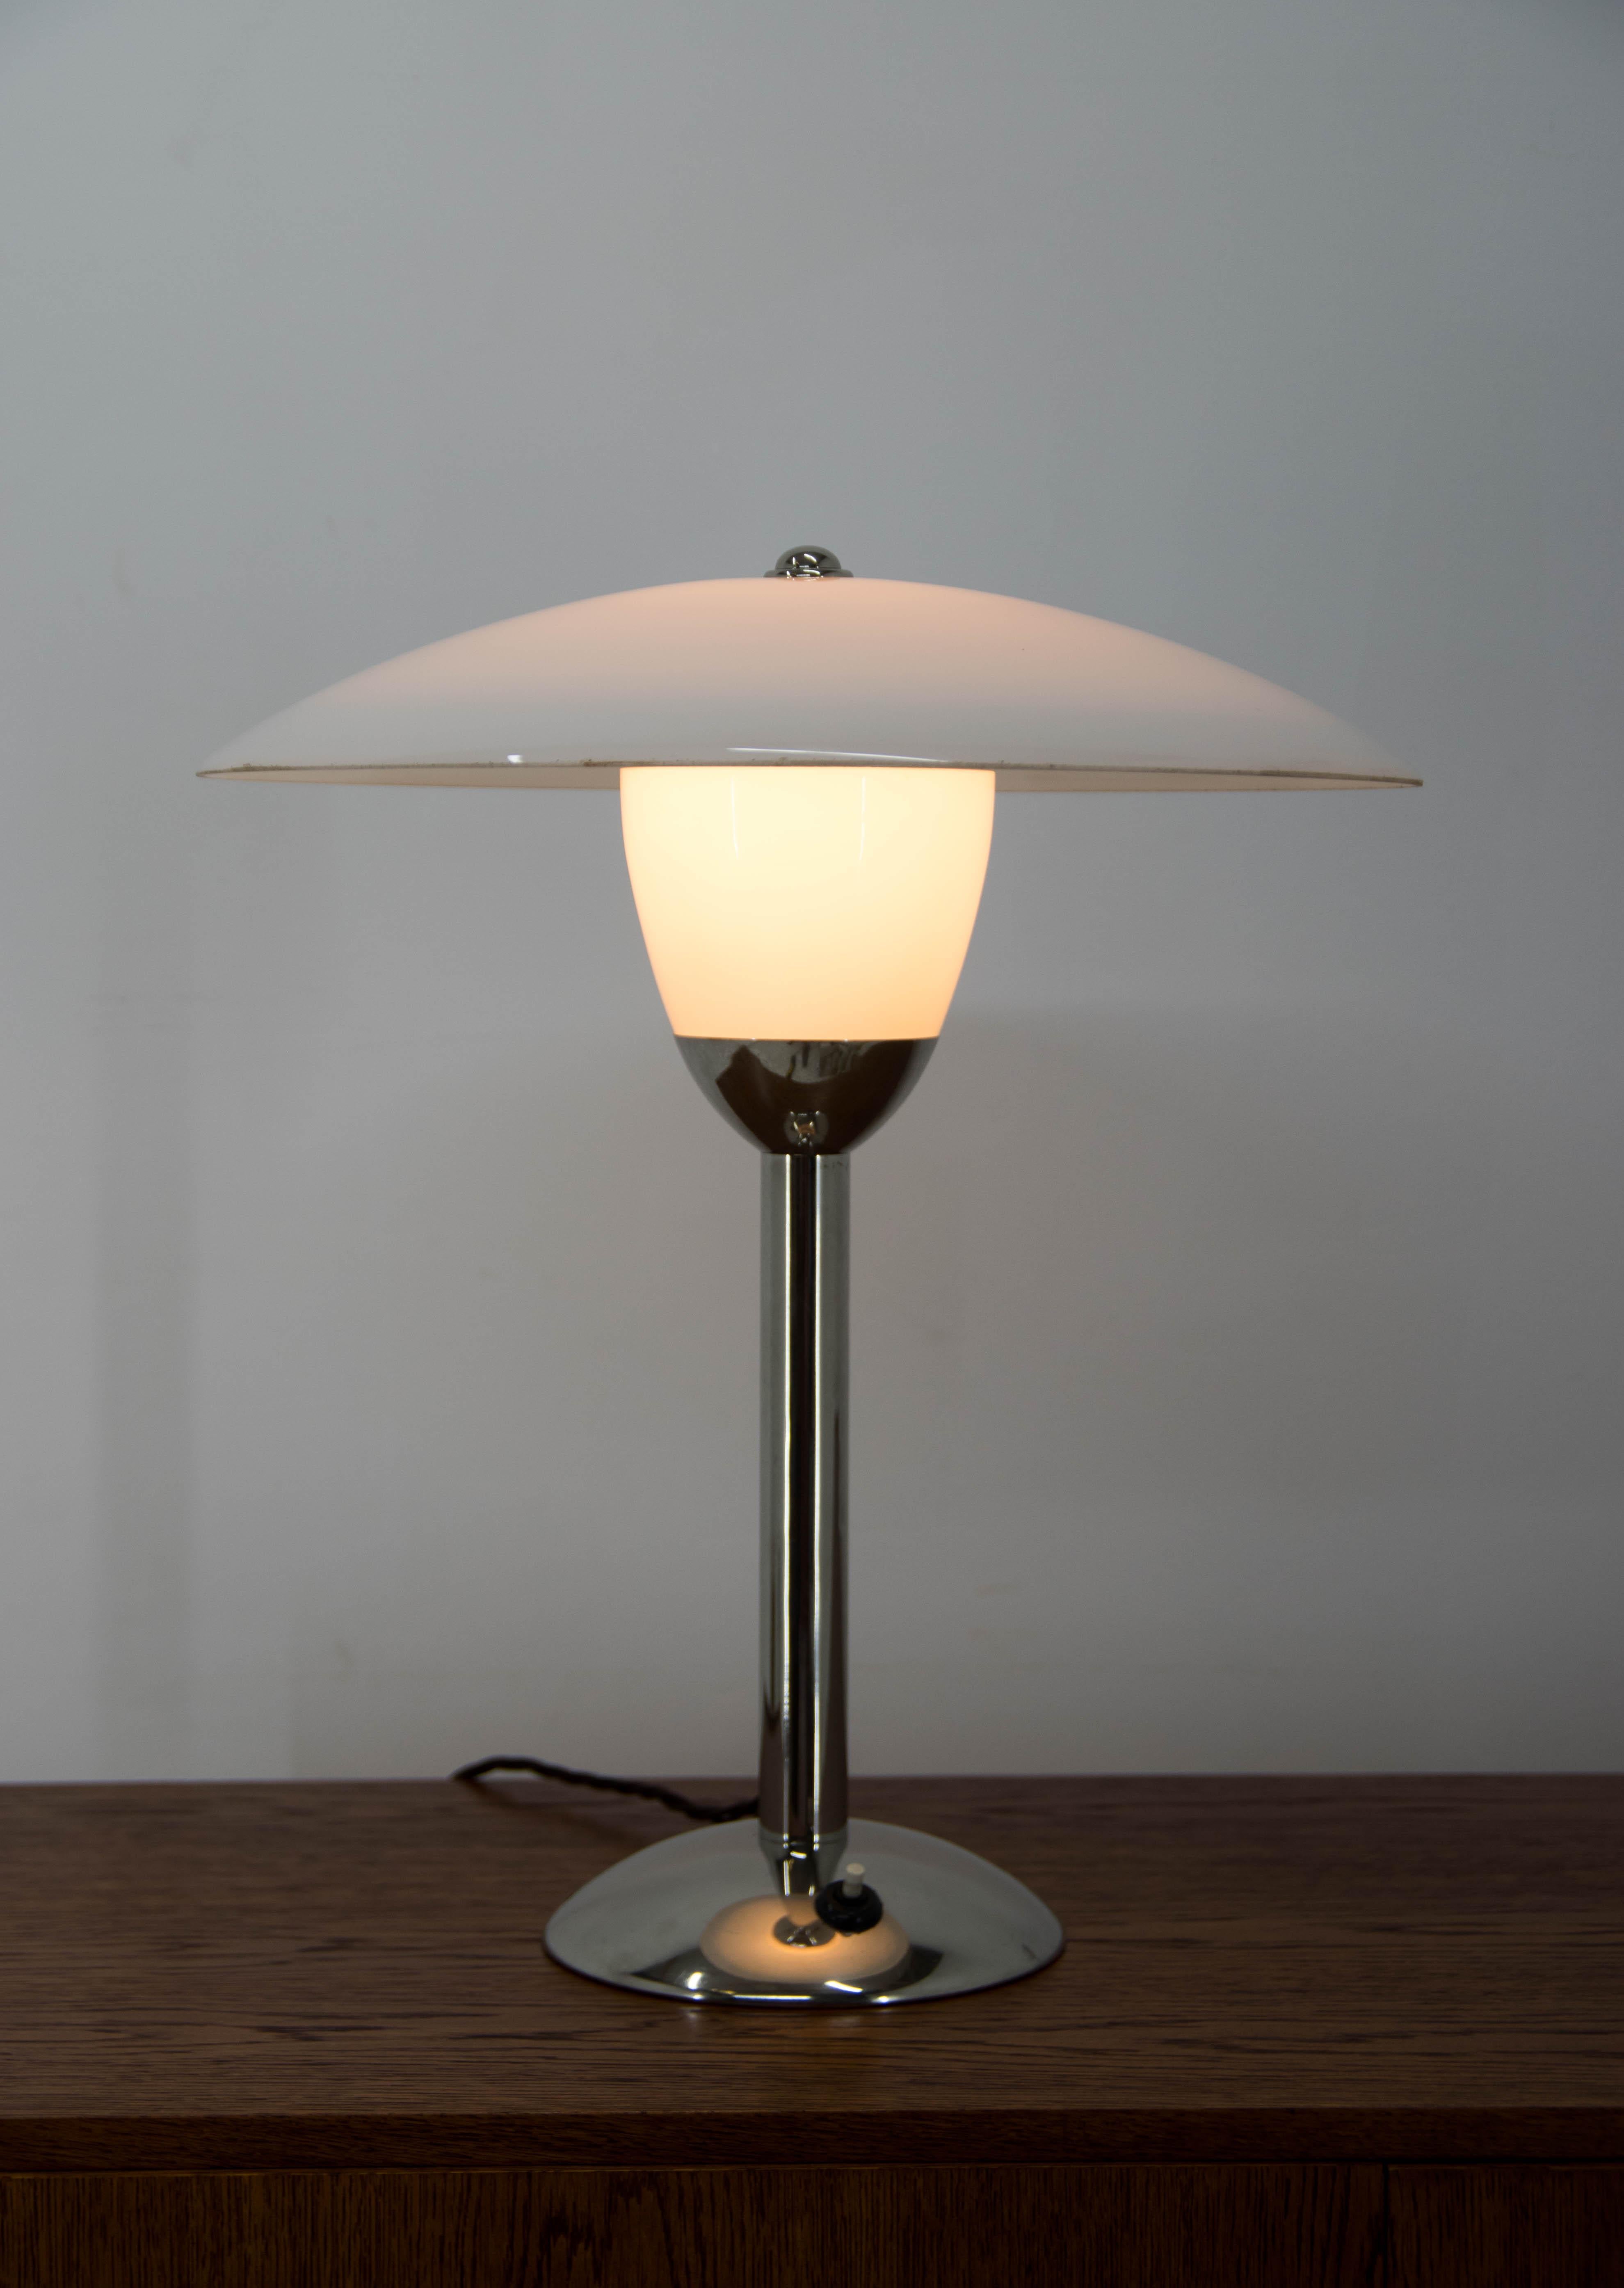 Rare Art Deco Table Lamp by Miloslav Prokop, 1930s In Good Condition For Sale In Praha, CZ